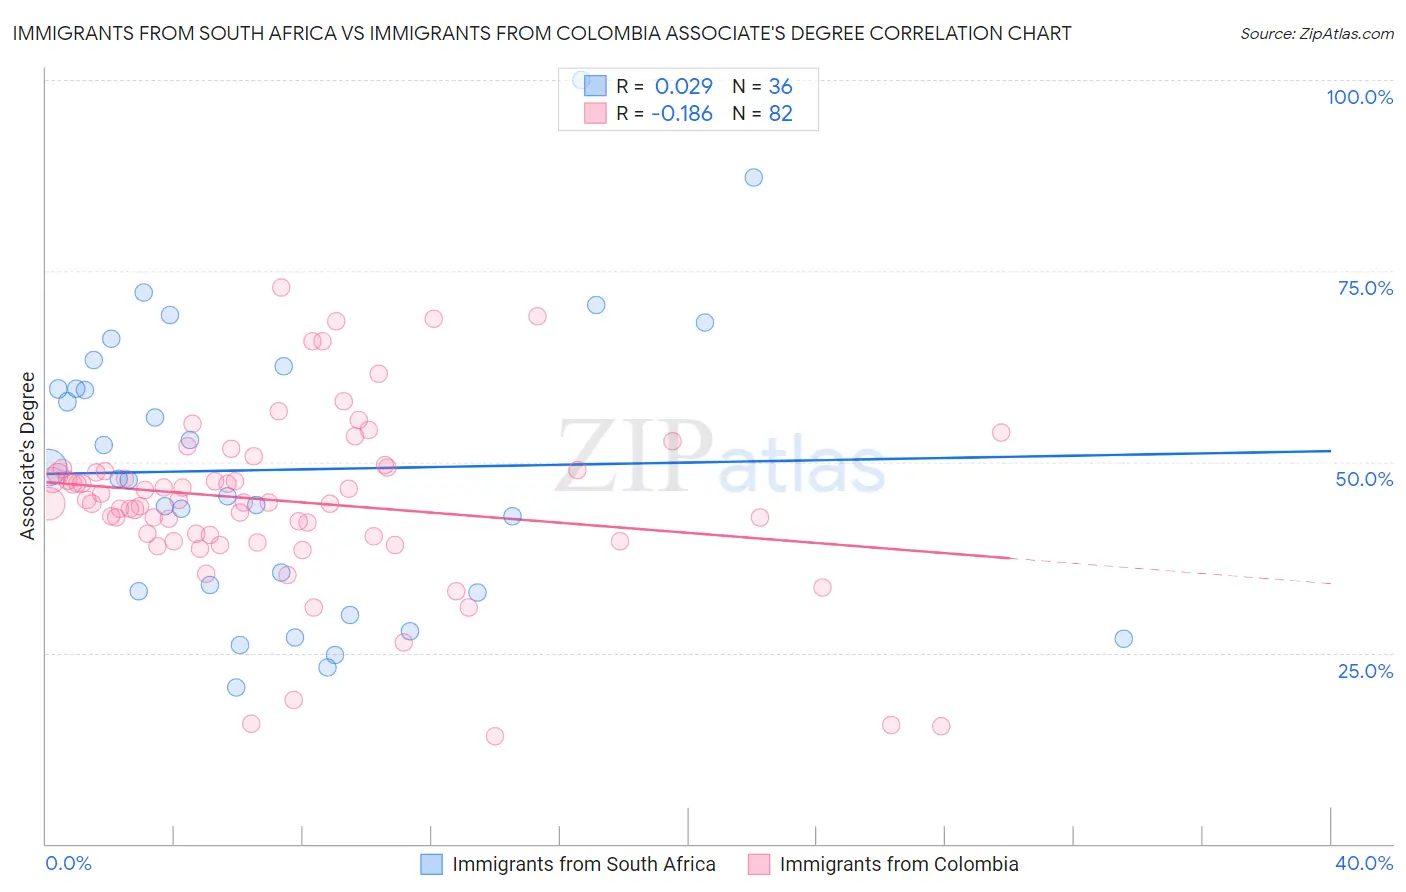 Immigrants from South Africa vs Immigrants from Colombia Associate's Degree